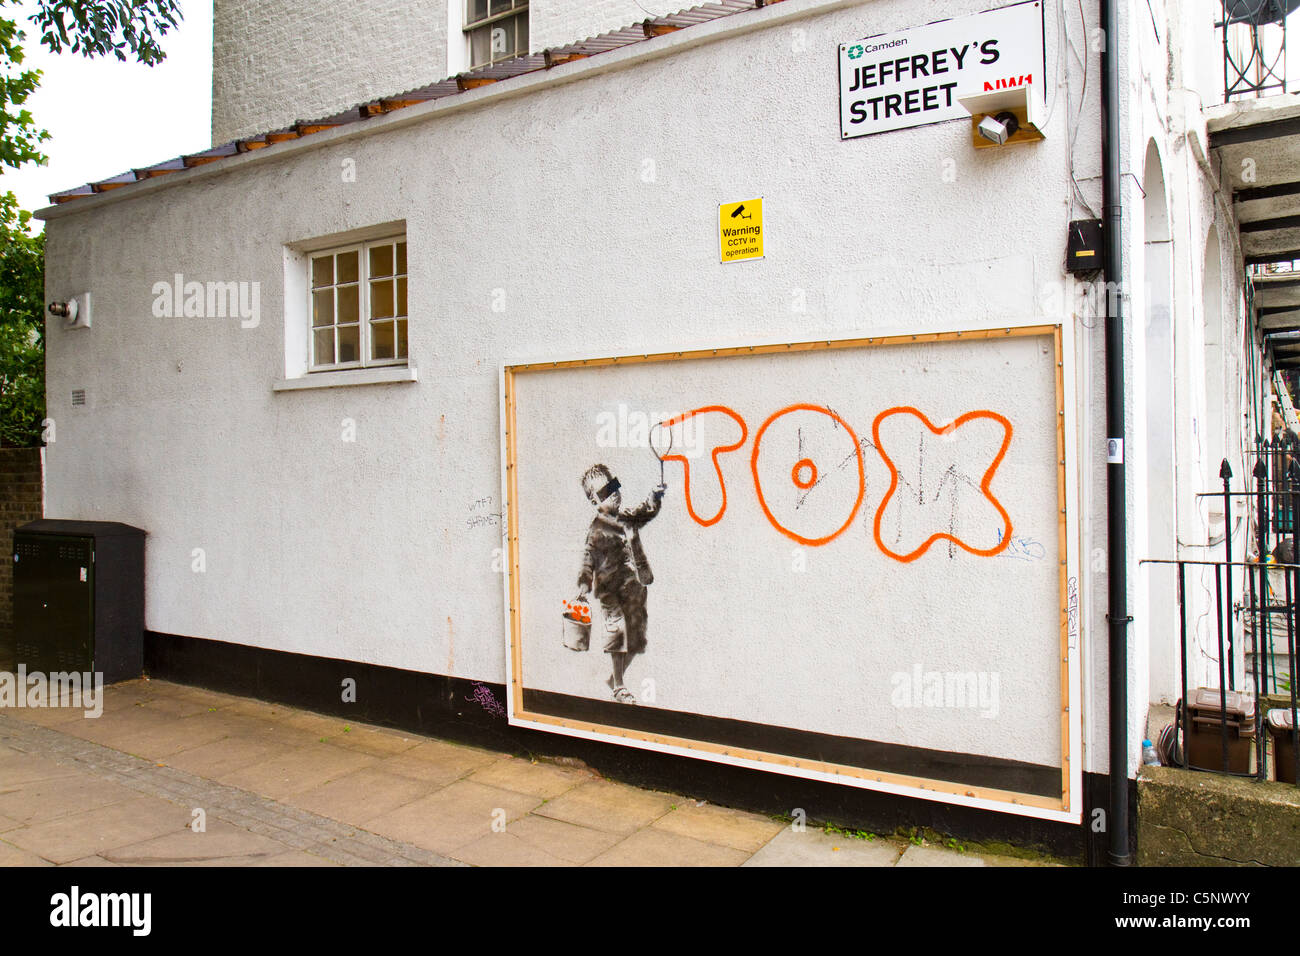 Graffiti art by street artist Banksy which mentions another graffiti writer, Tox, on a wall in Camden Town, London, UK. Stock Photo